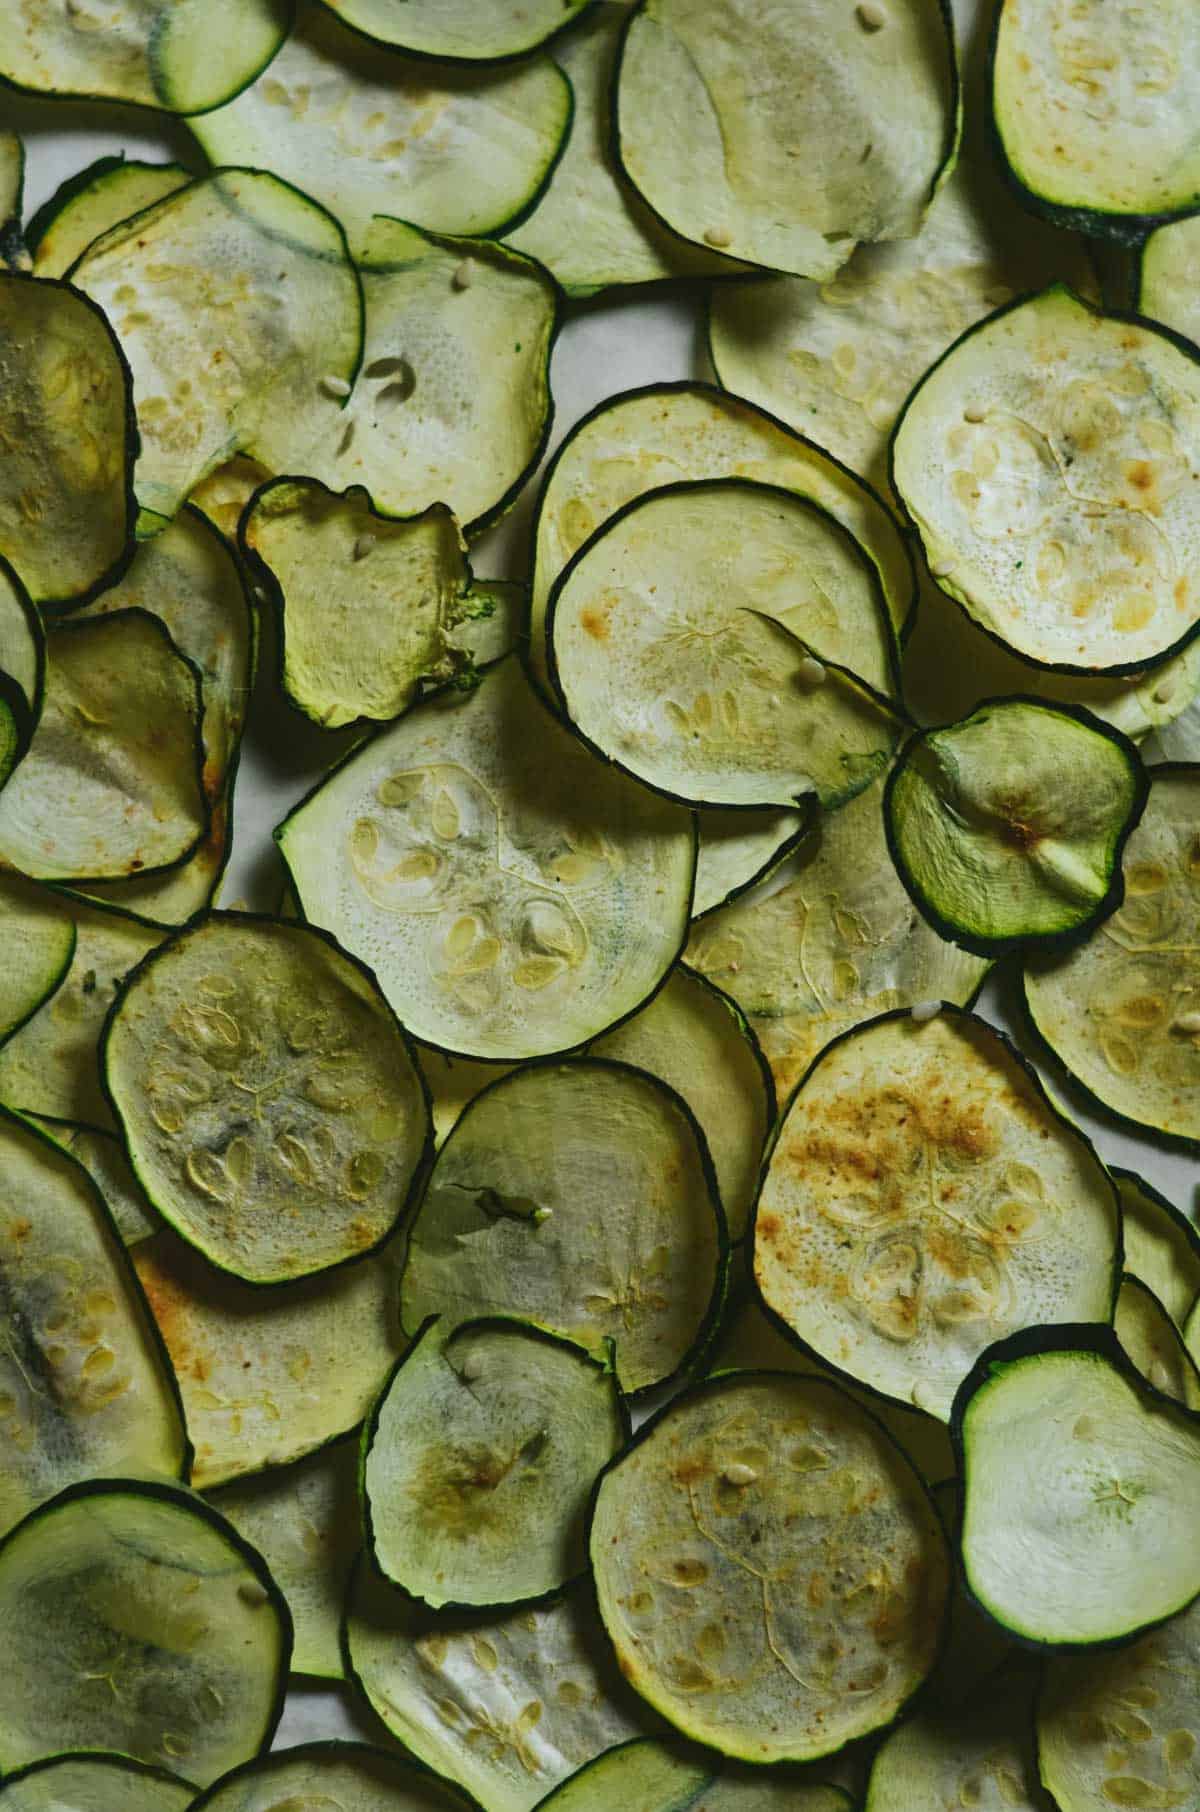 Dehydrated zucchini chips laying flat over lapping each other